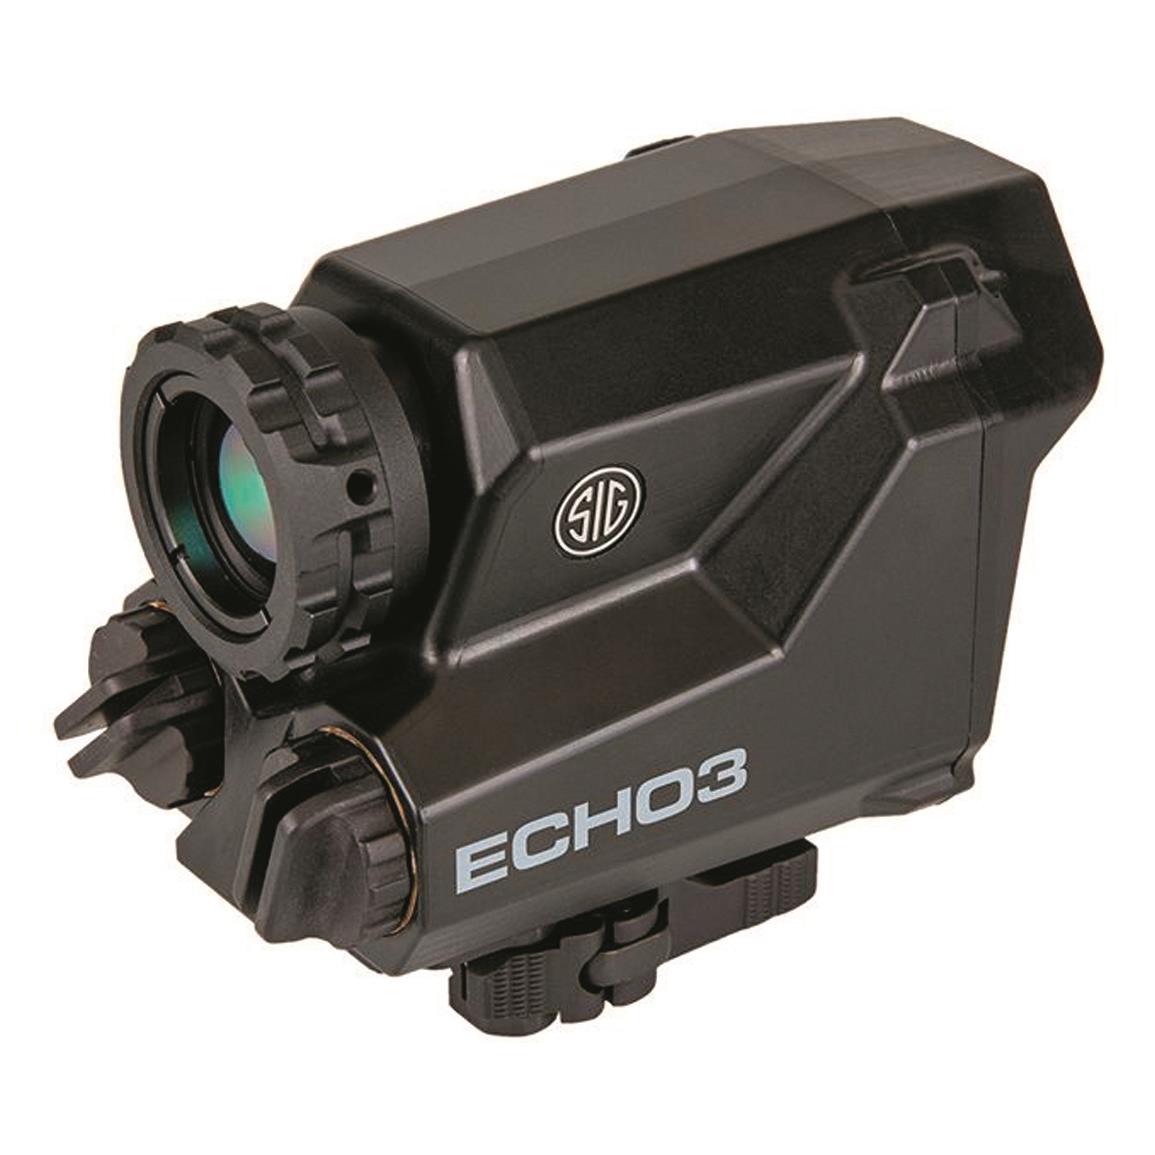 SIG SAUER ECHO3 2-12x40mm Thermal Reflex Sight, Multiple Reticles